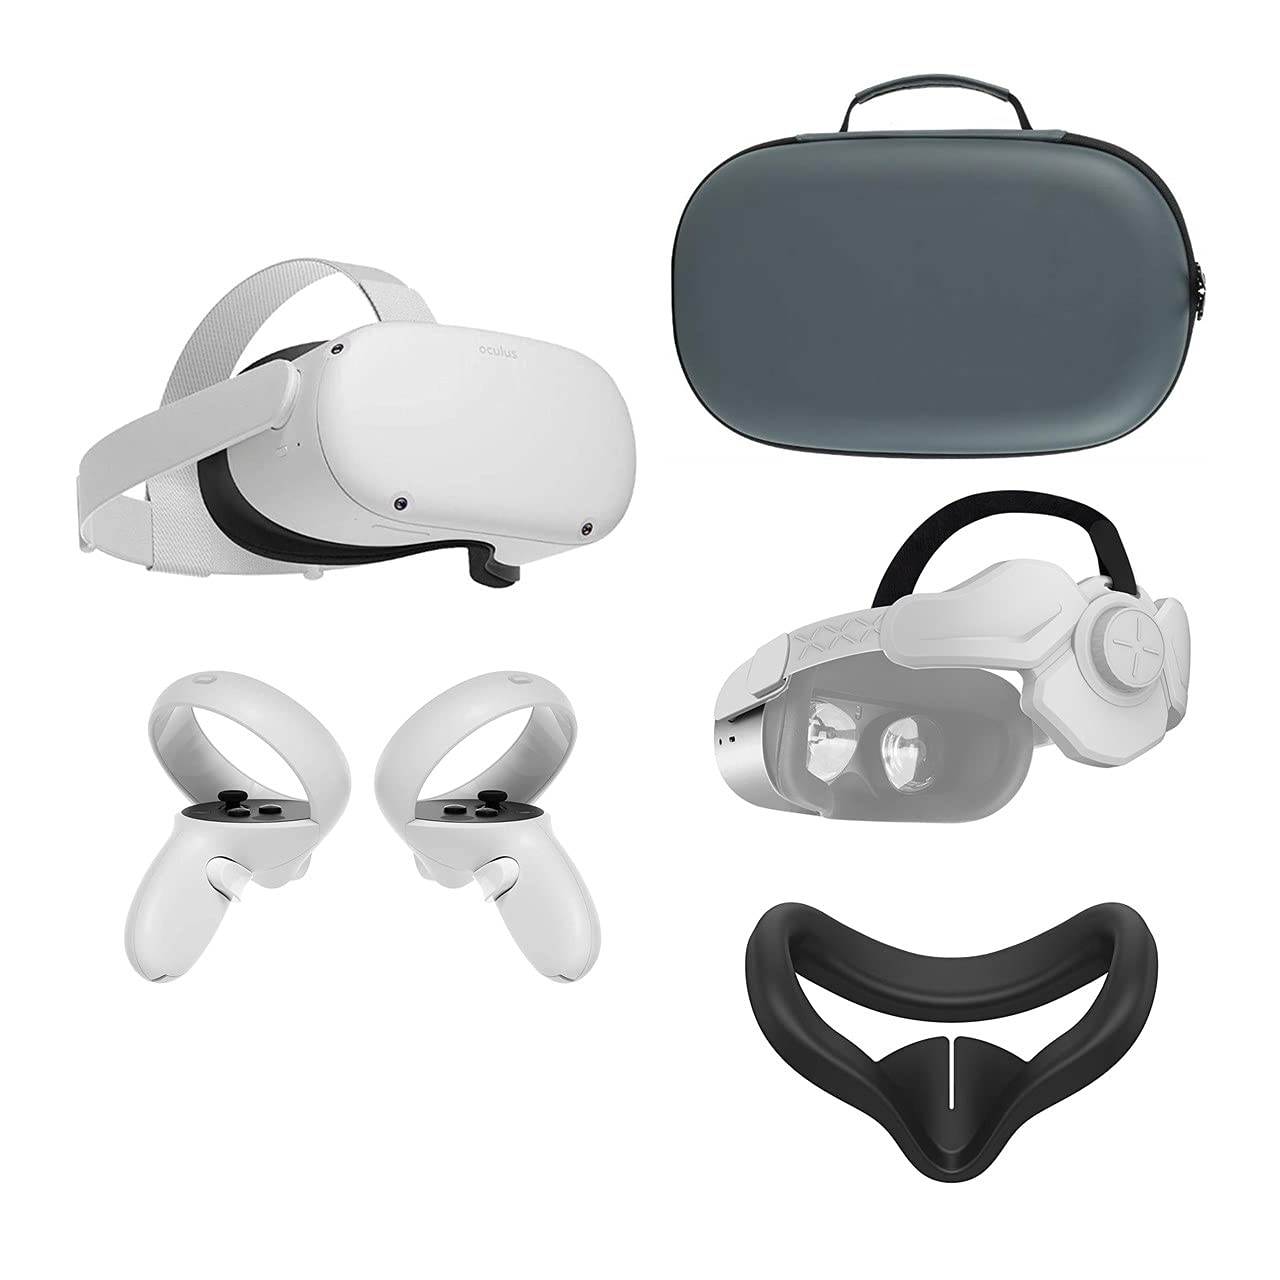 128GB Oculus Quest 2 All-In-One Virtual Reality Headset Pre-Order 